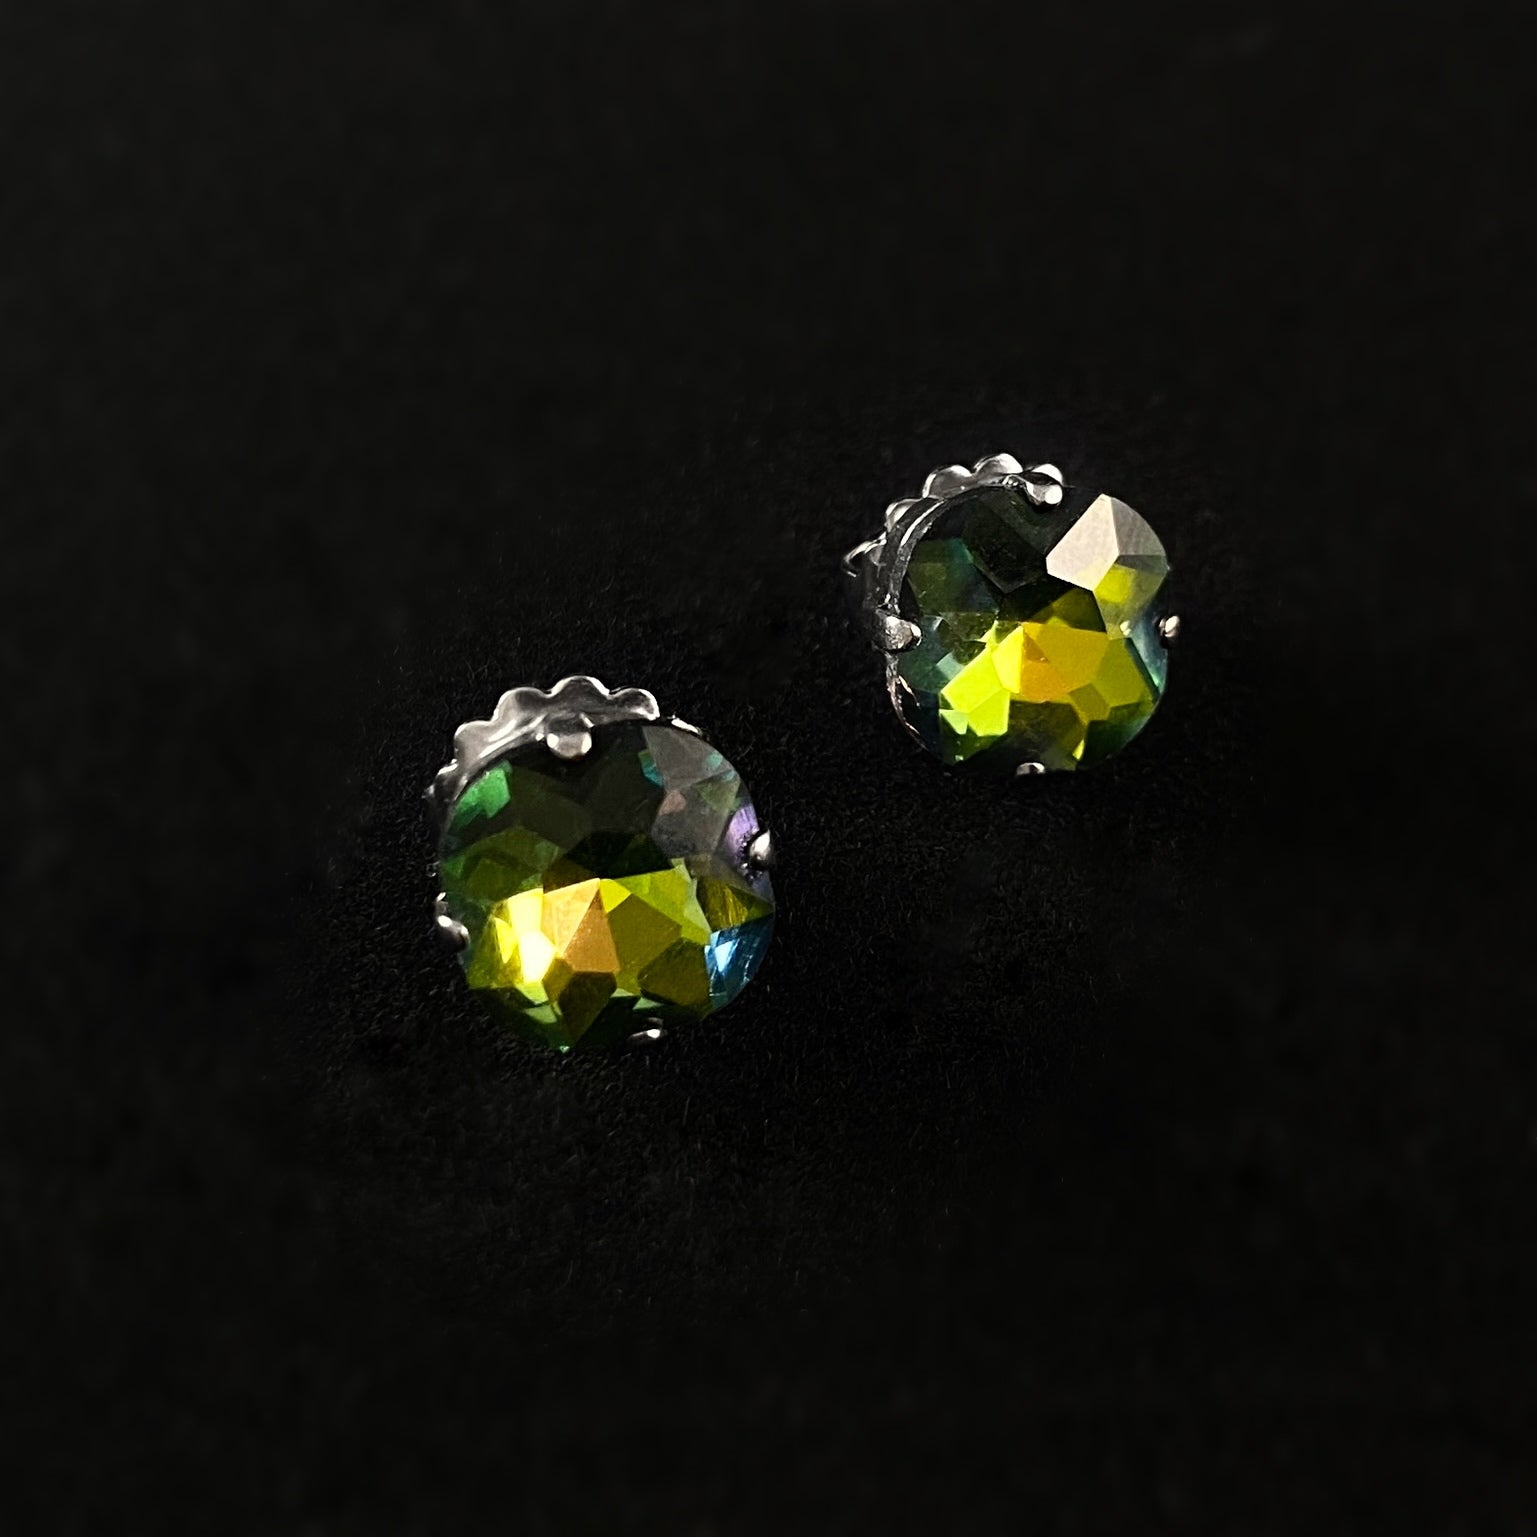 Multicolor Crystal Stud Earrings with Antique Finish